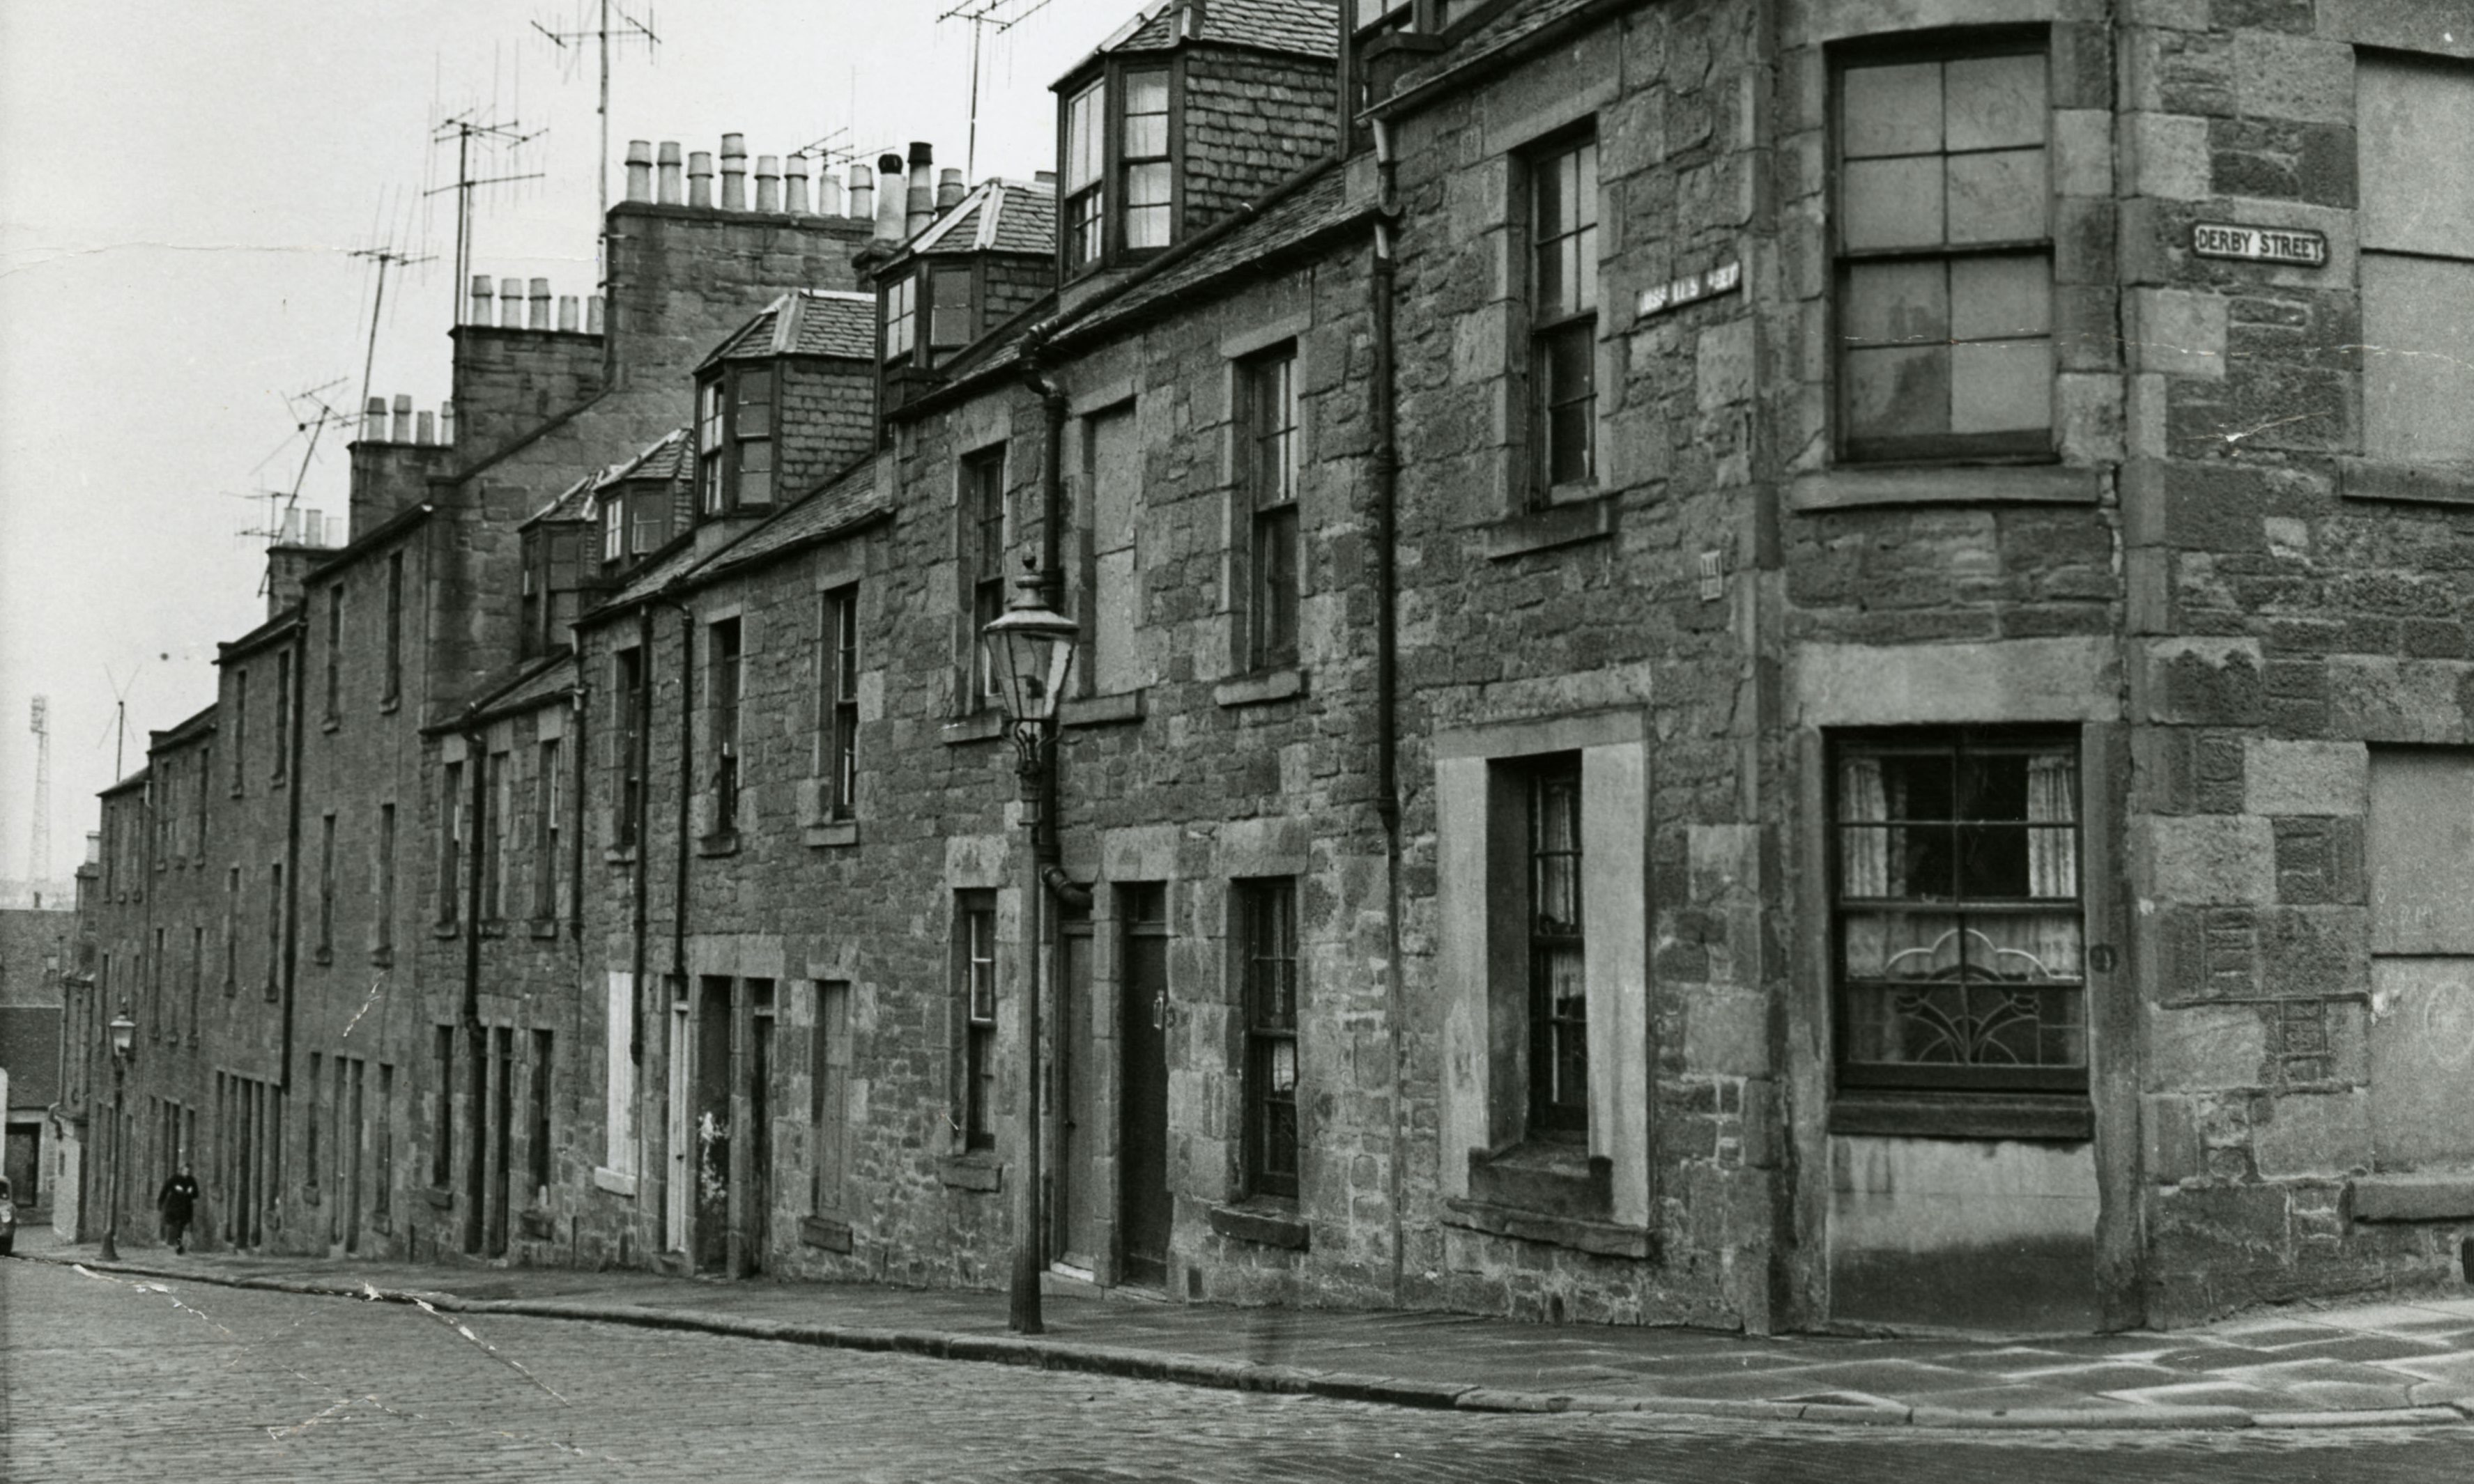 The former Russell Street in Dundee photographed in 1962.